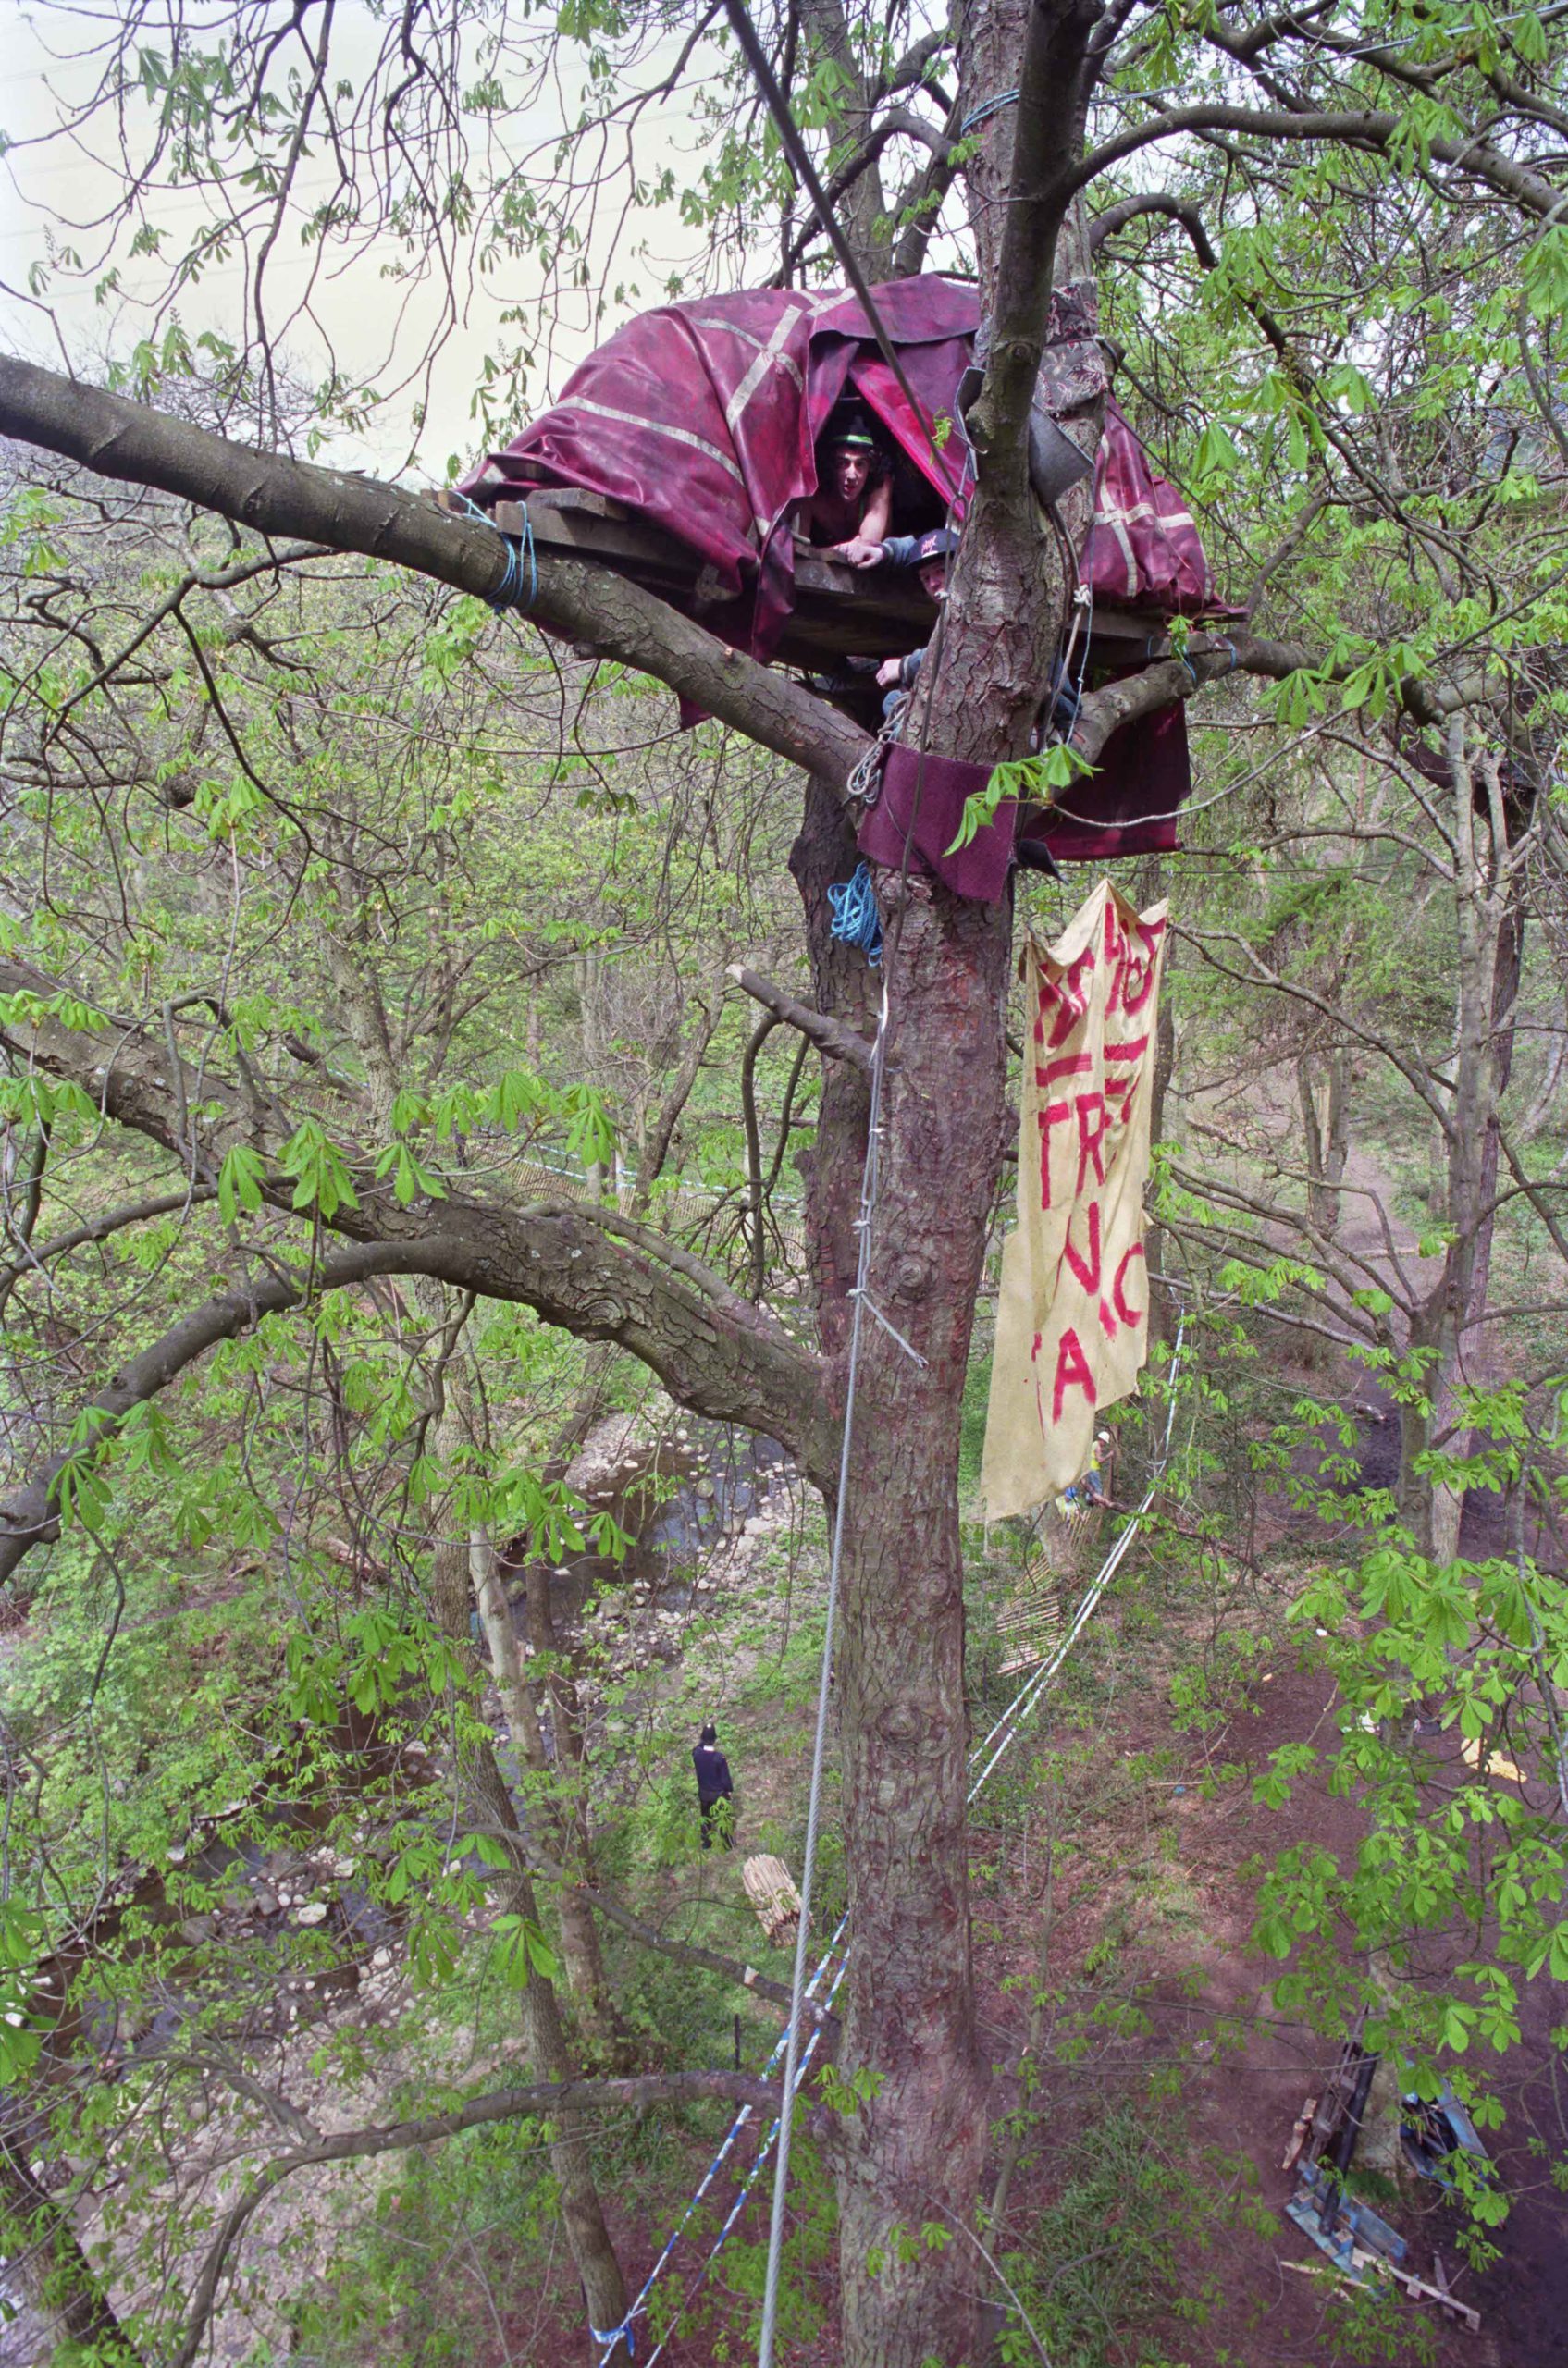 Protester living in a tent up a tree, historical photograph